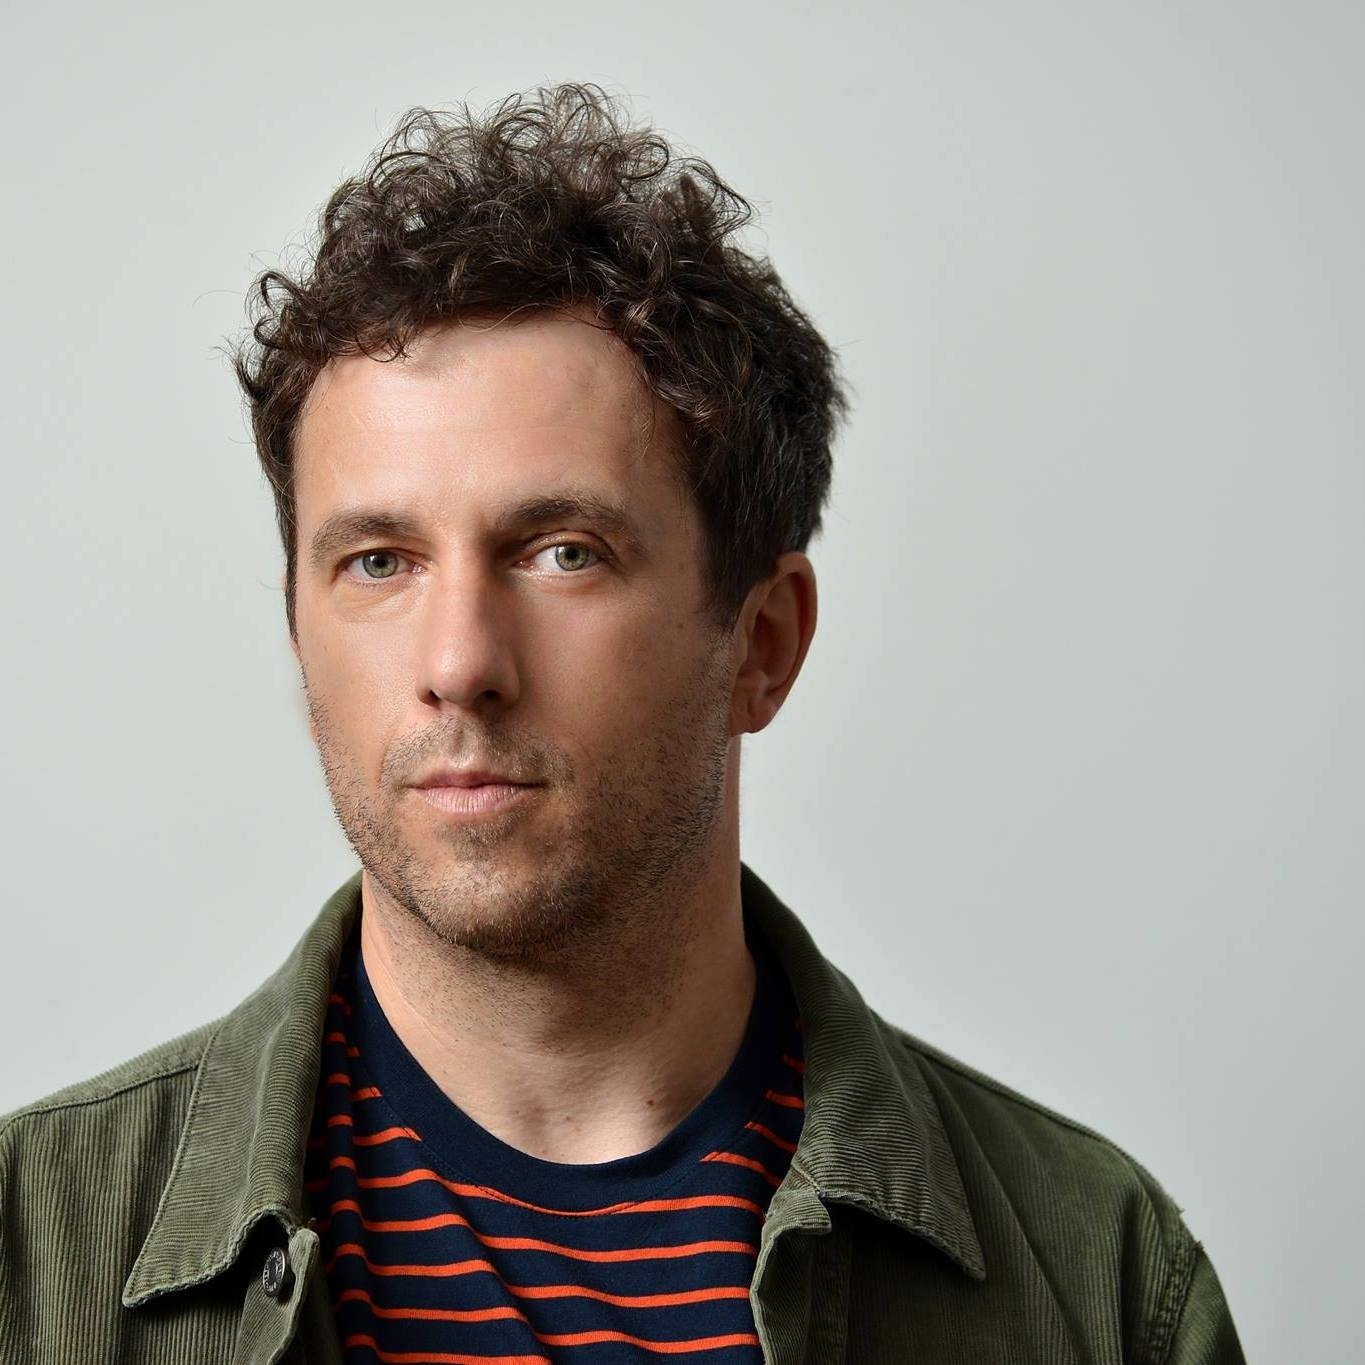 Will Hoge brings 'Anchors' to Europe for tour in March